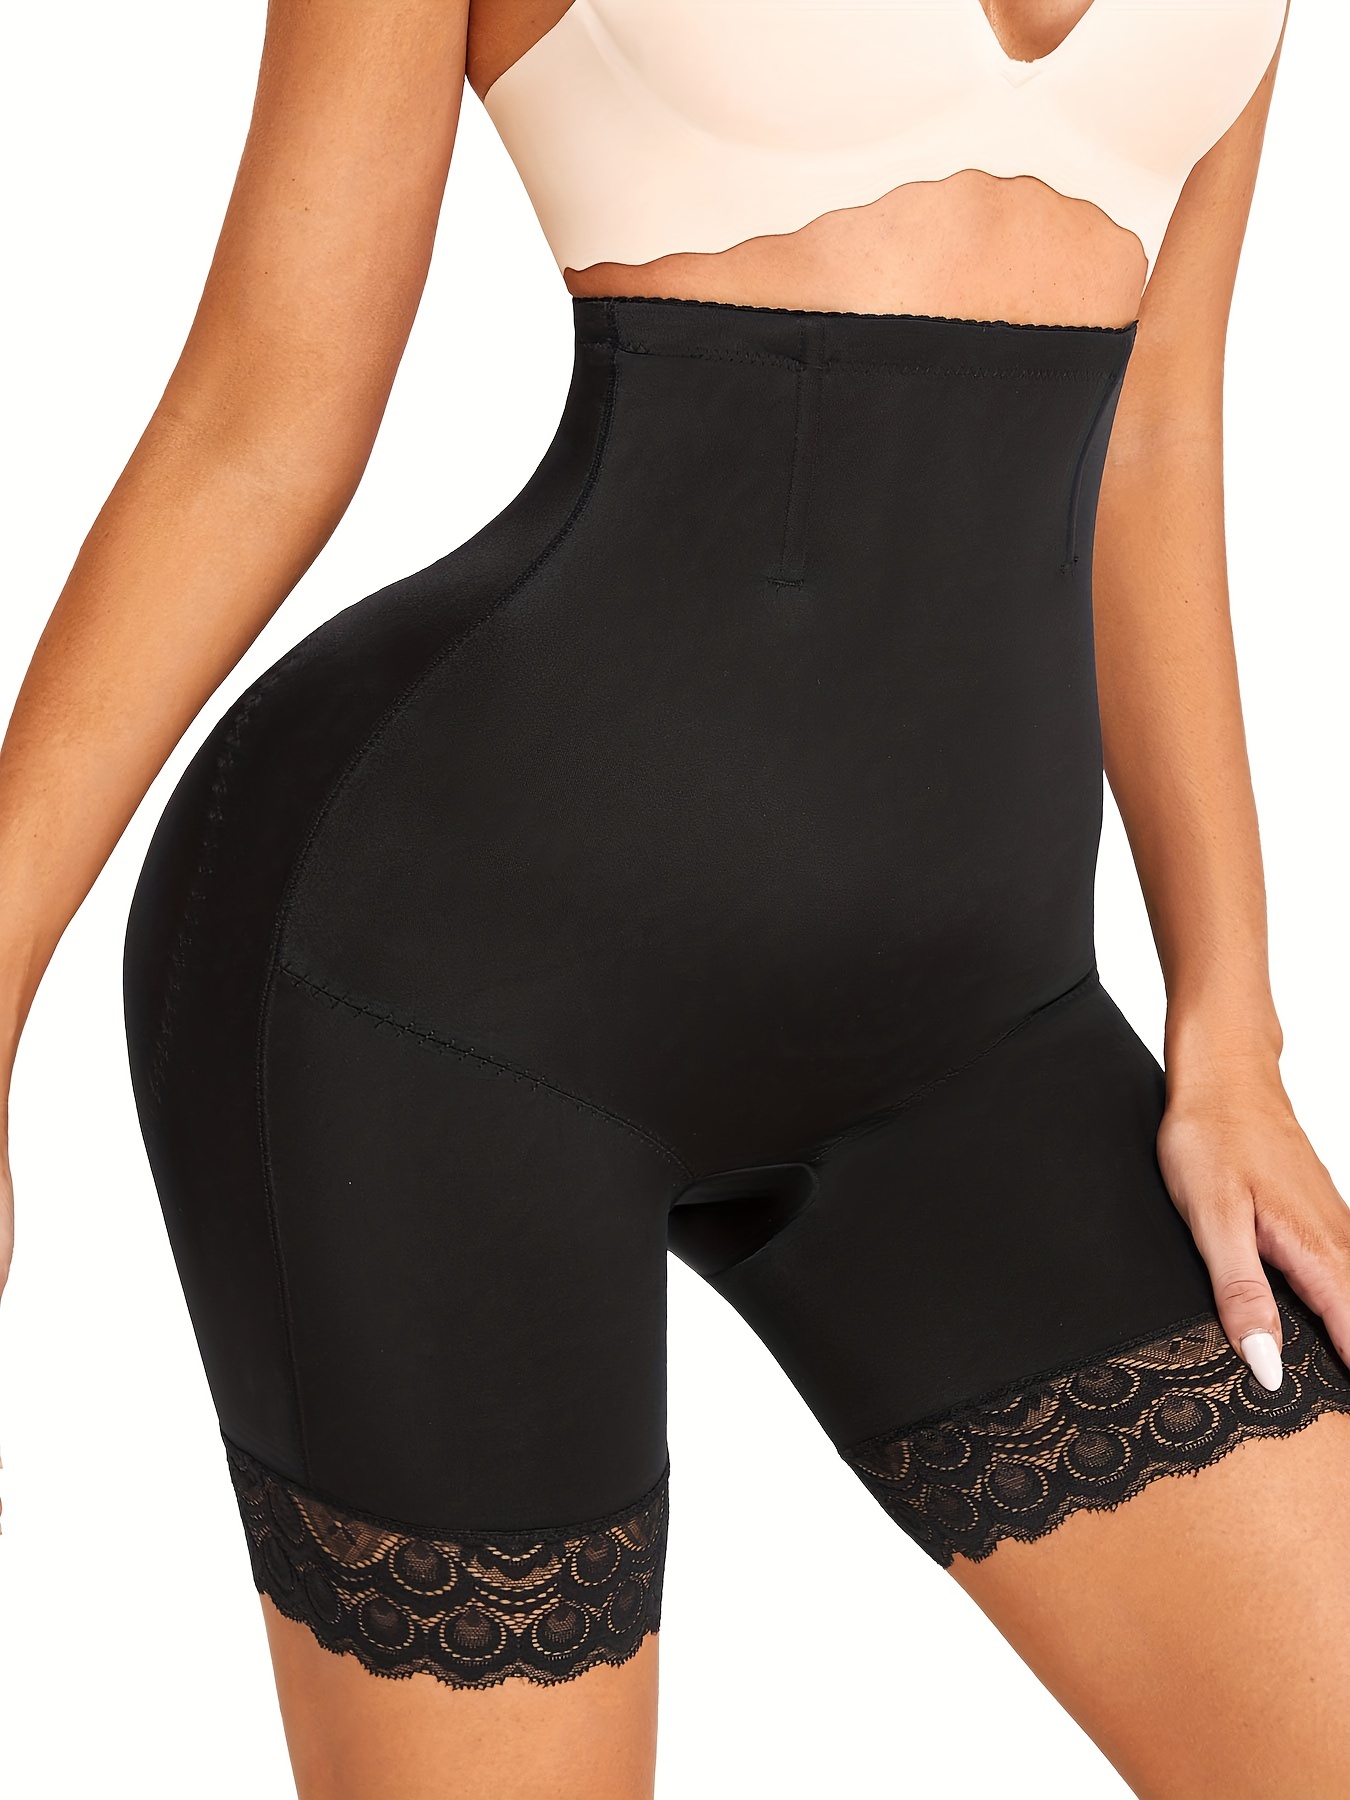 nsendm Female Underwear Adult Corset Top Ladies Shapewear Zippered Tulle See  Through Side Gathering Shapewear Sexy Spandex Shorts for under(Black, XL) 